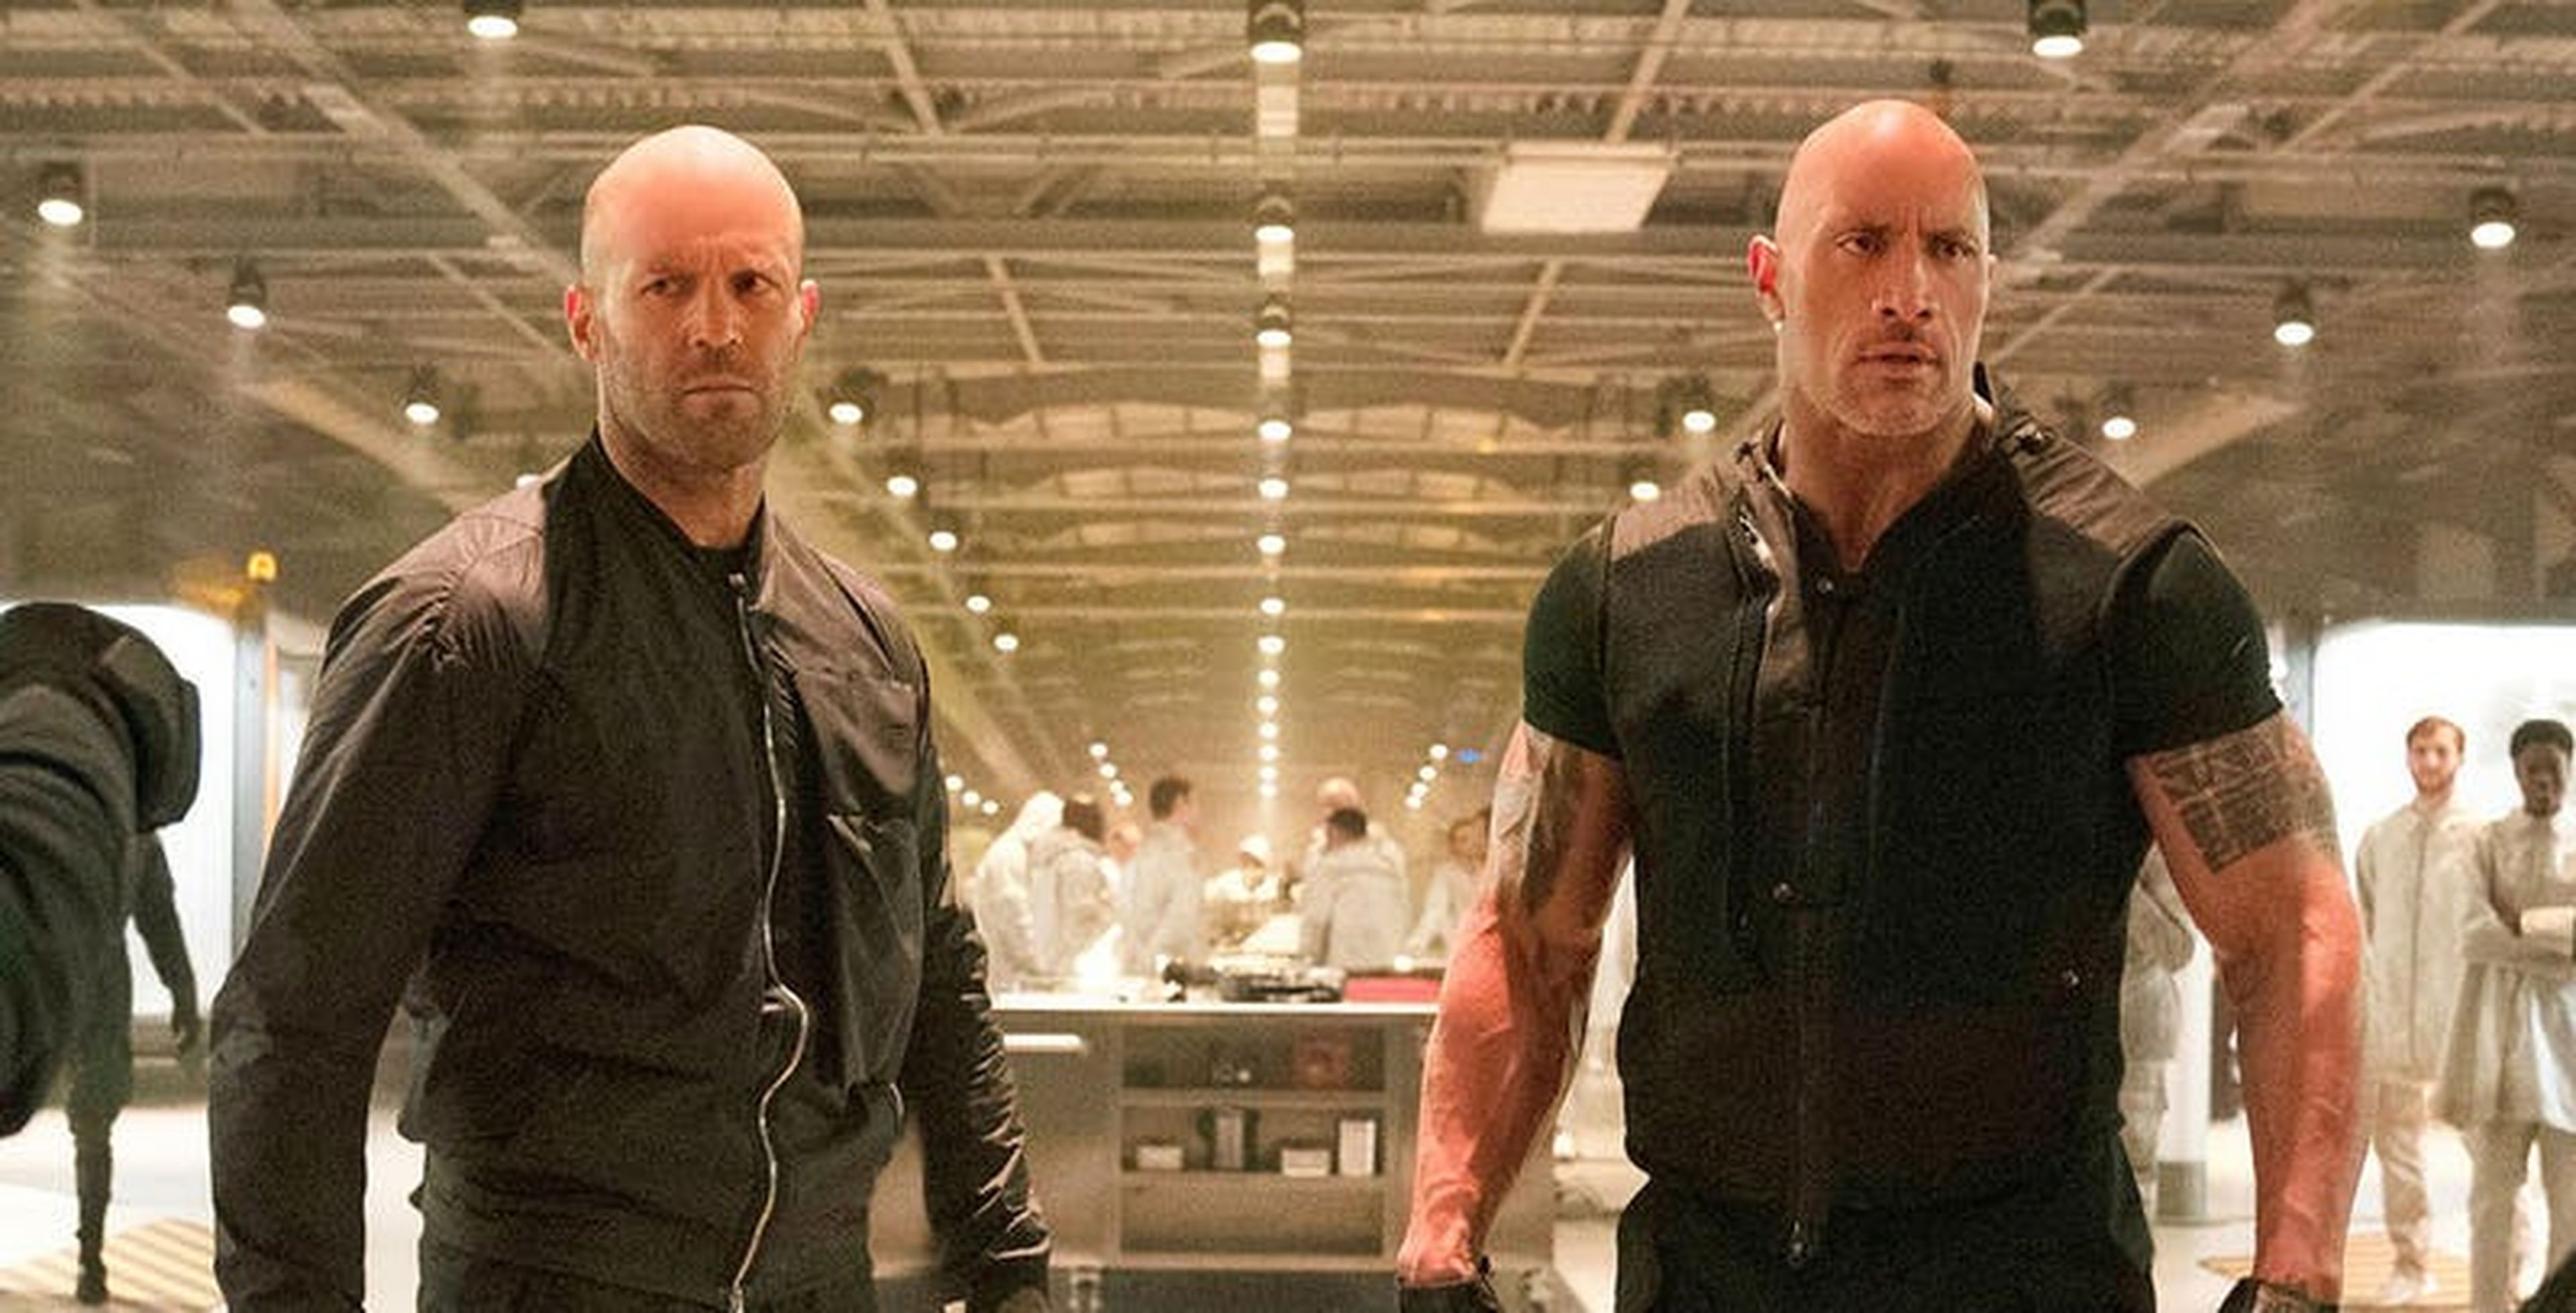 Hobbs and Shaw Fast and Furious